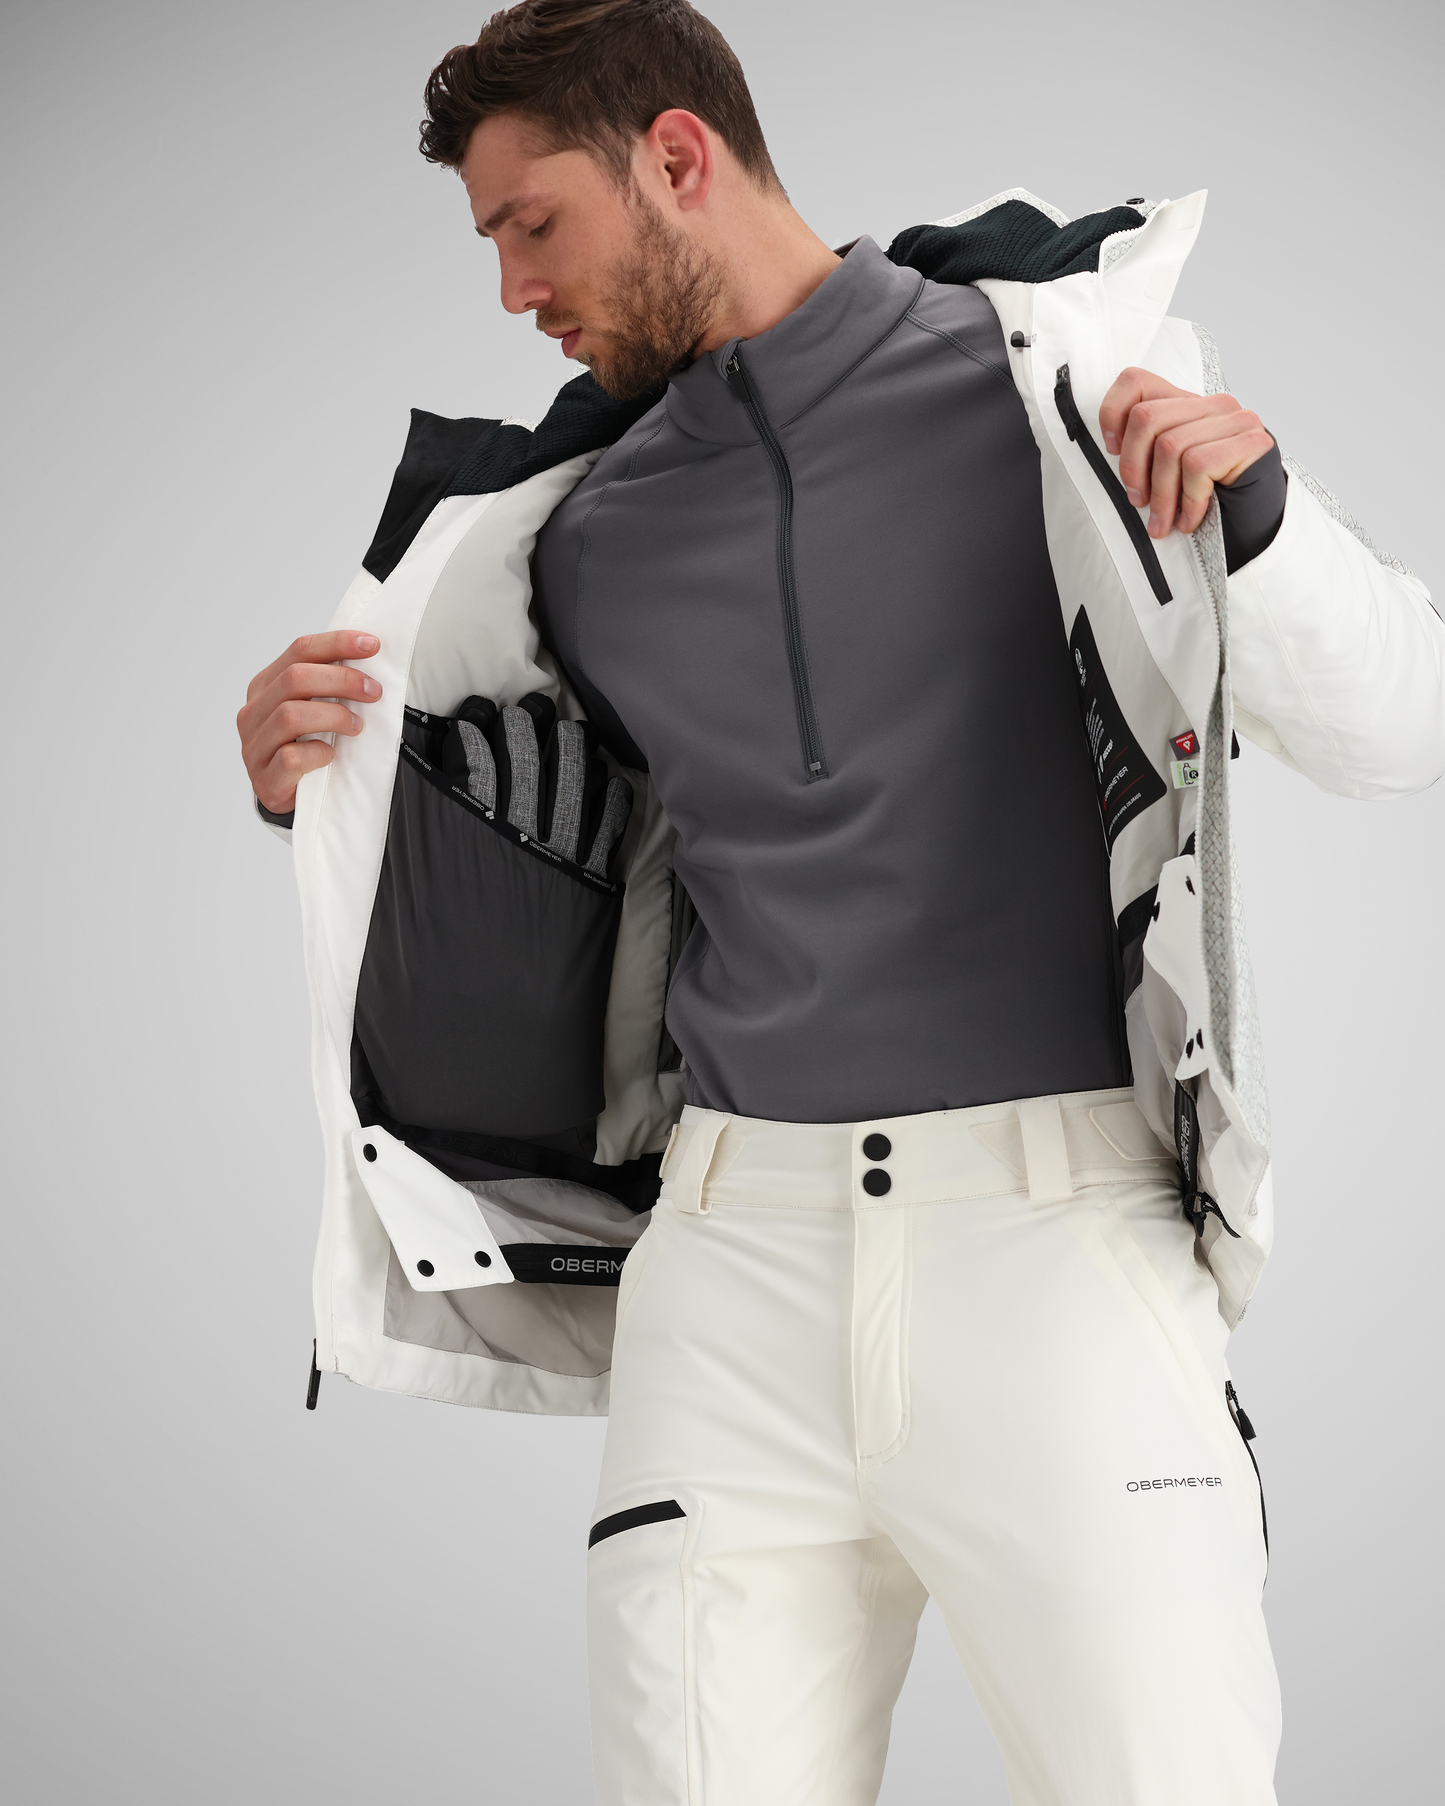 Interior feature array | This jacket offers a variety of interior pockets for electronics and other items such as wallets, keys, goggles, and sunglasses. 